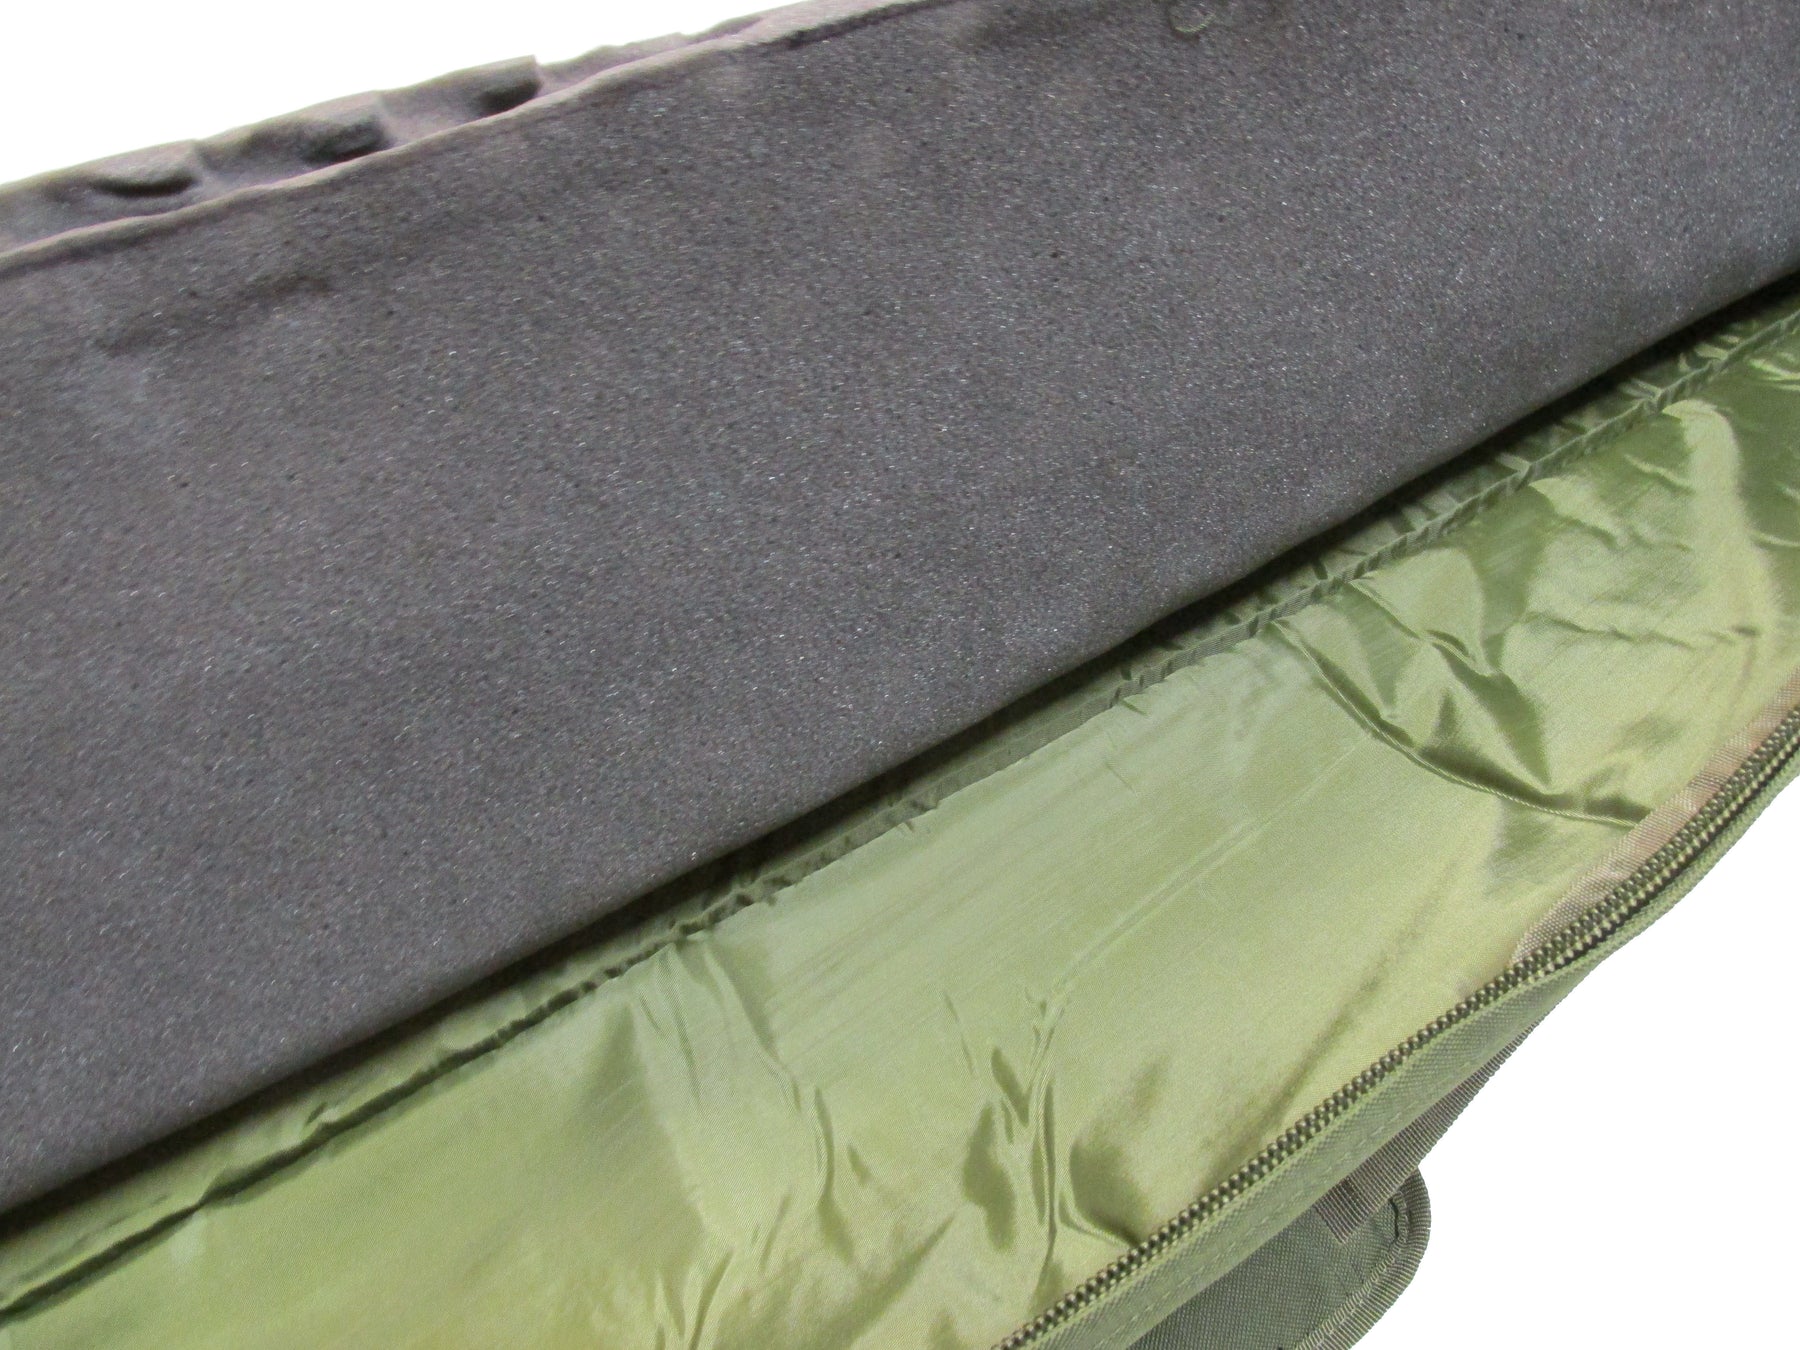 CLEARANCE - Military Uniform Supply 42 Inch Single Rifle Case - OLIVE DRAB